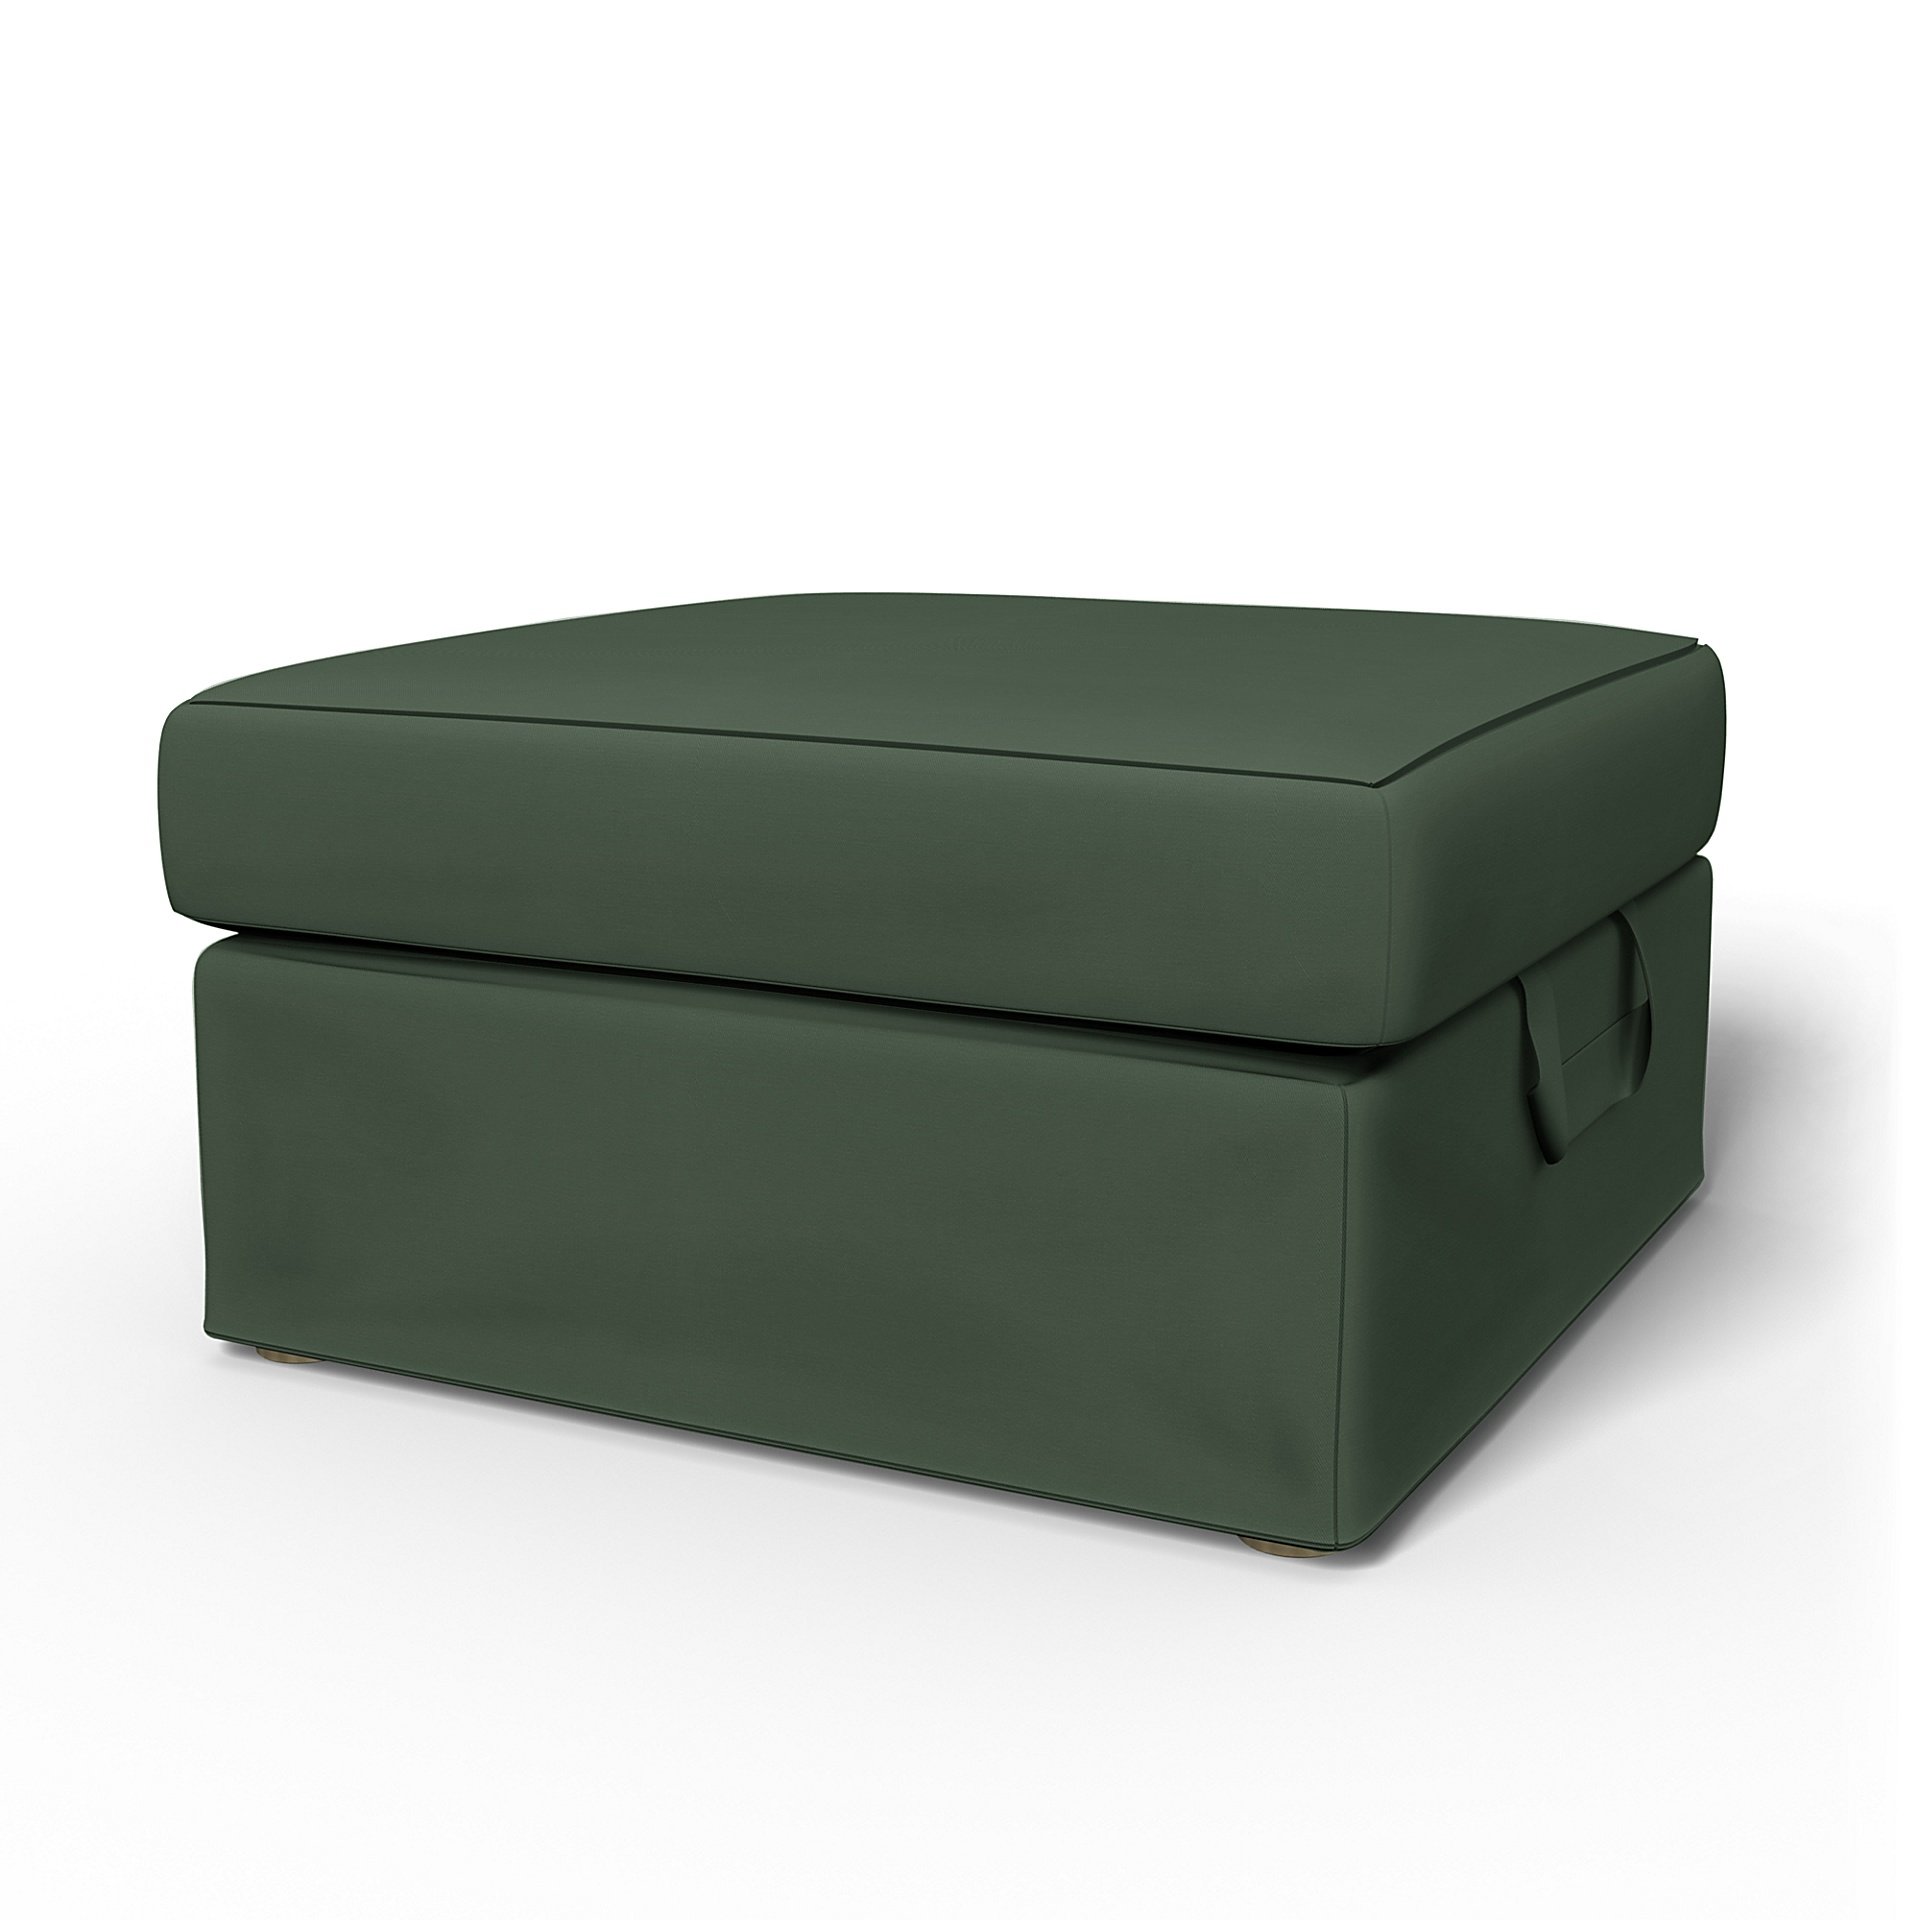 IKEA - Tomelilla Foto Footstool Cover, Thyme, Cotton - Bemz